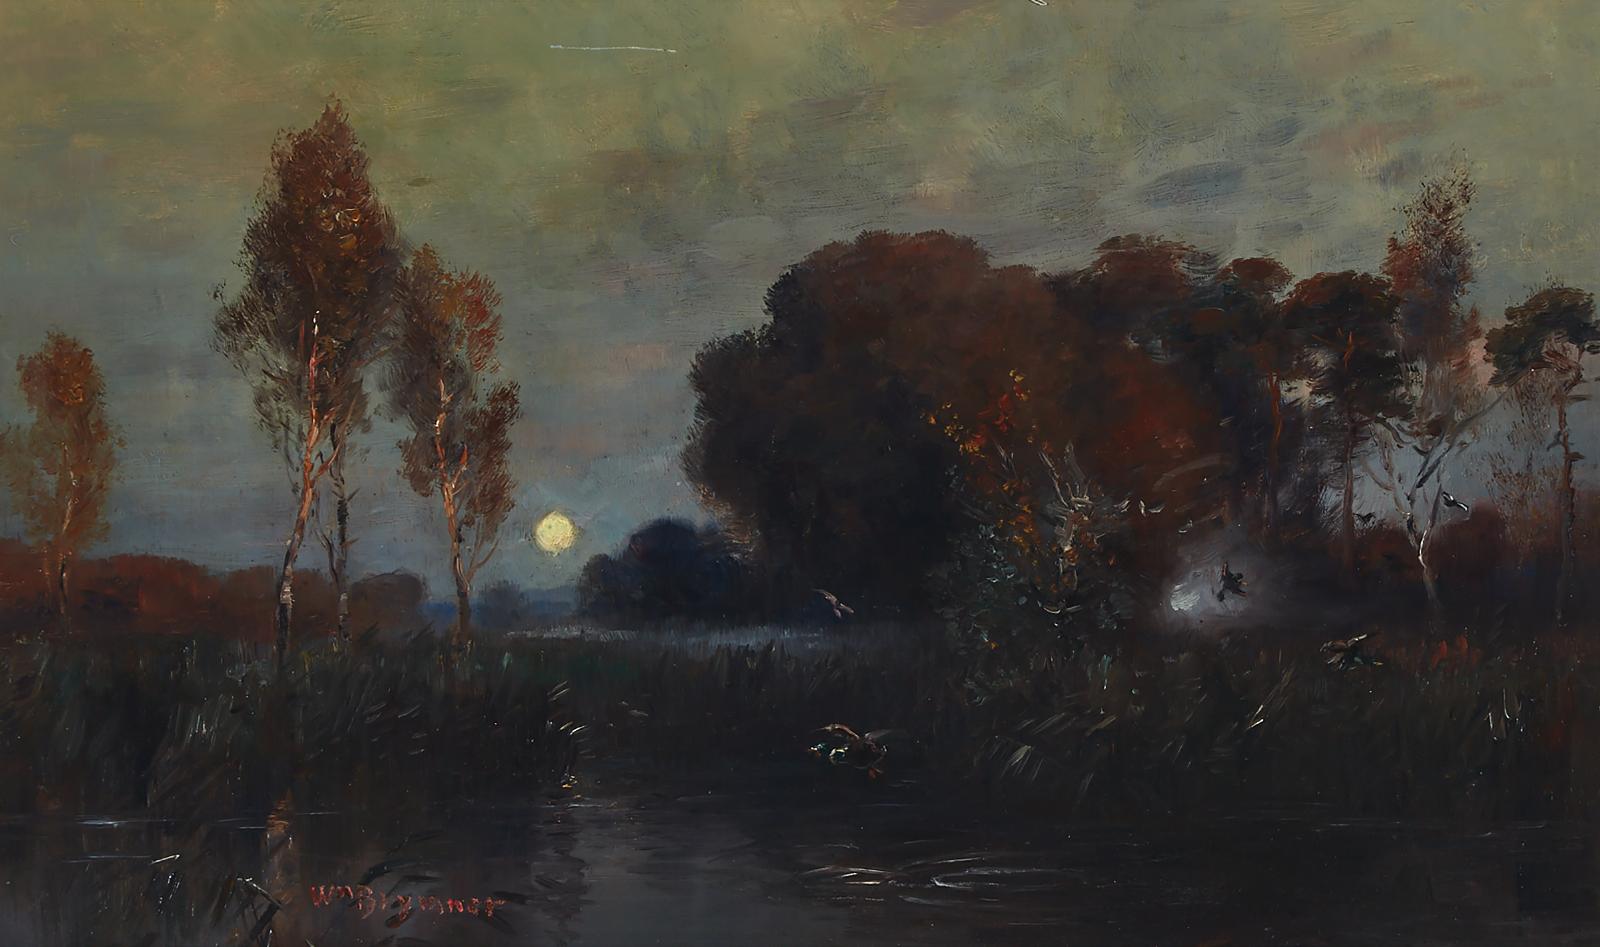 William Brymner (1855-1925) - Early Morning Near St. Lawrence